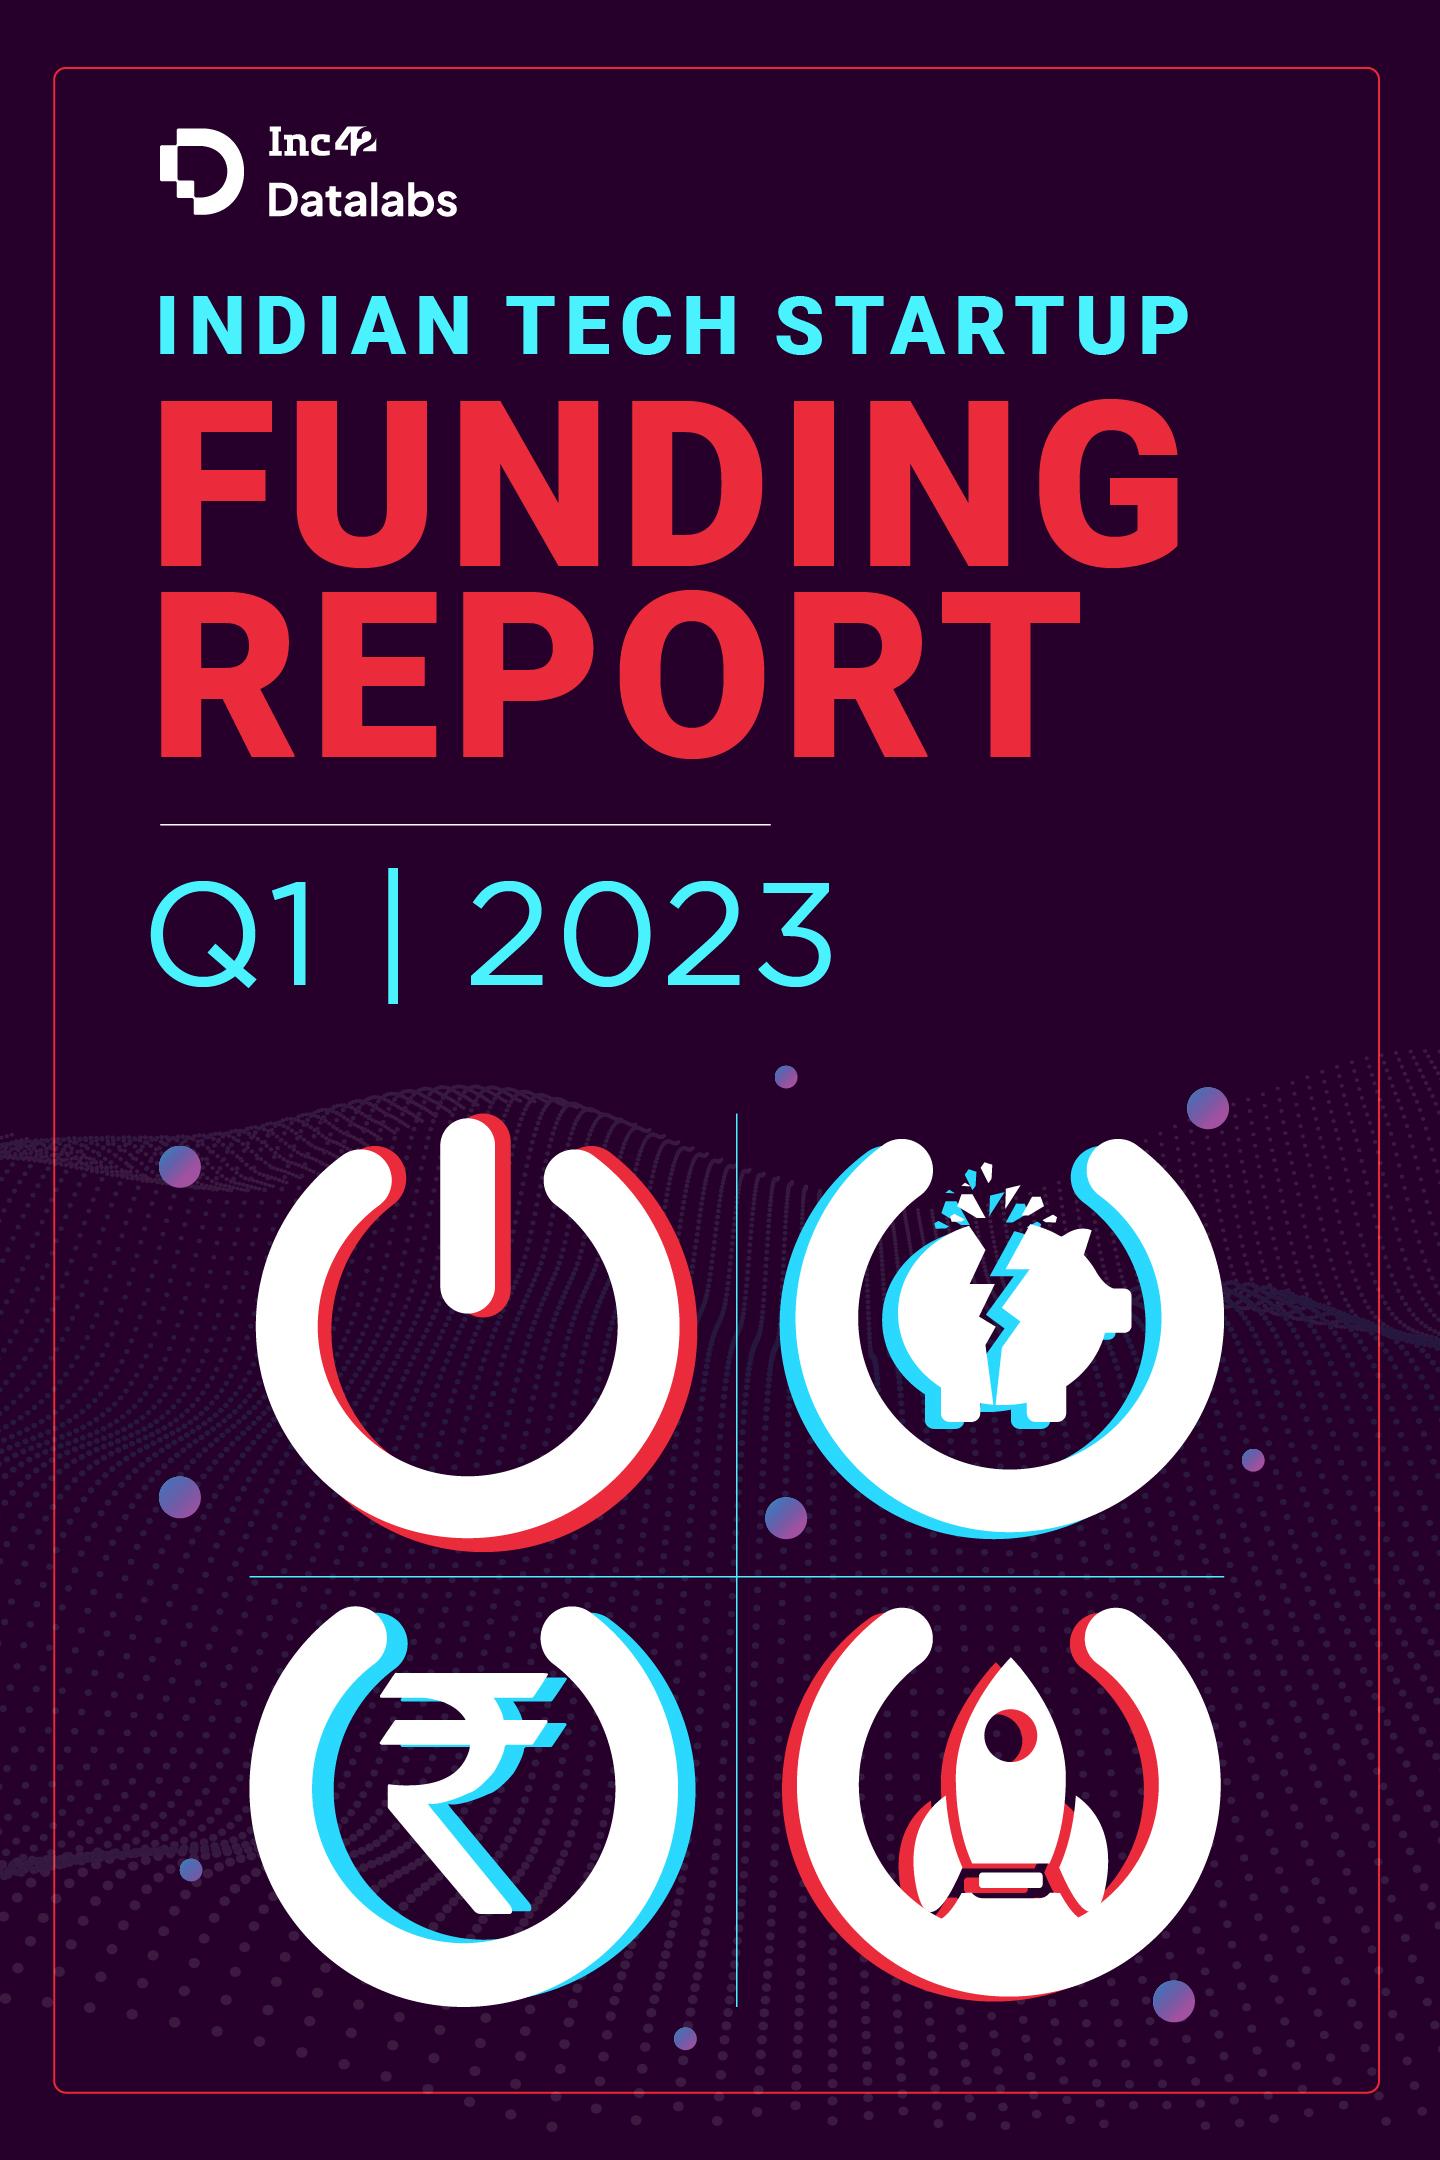 Indian Tech Startup Funding Report Q1 2023